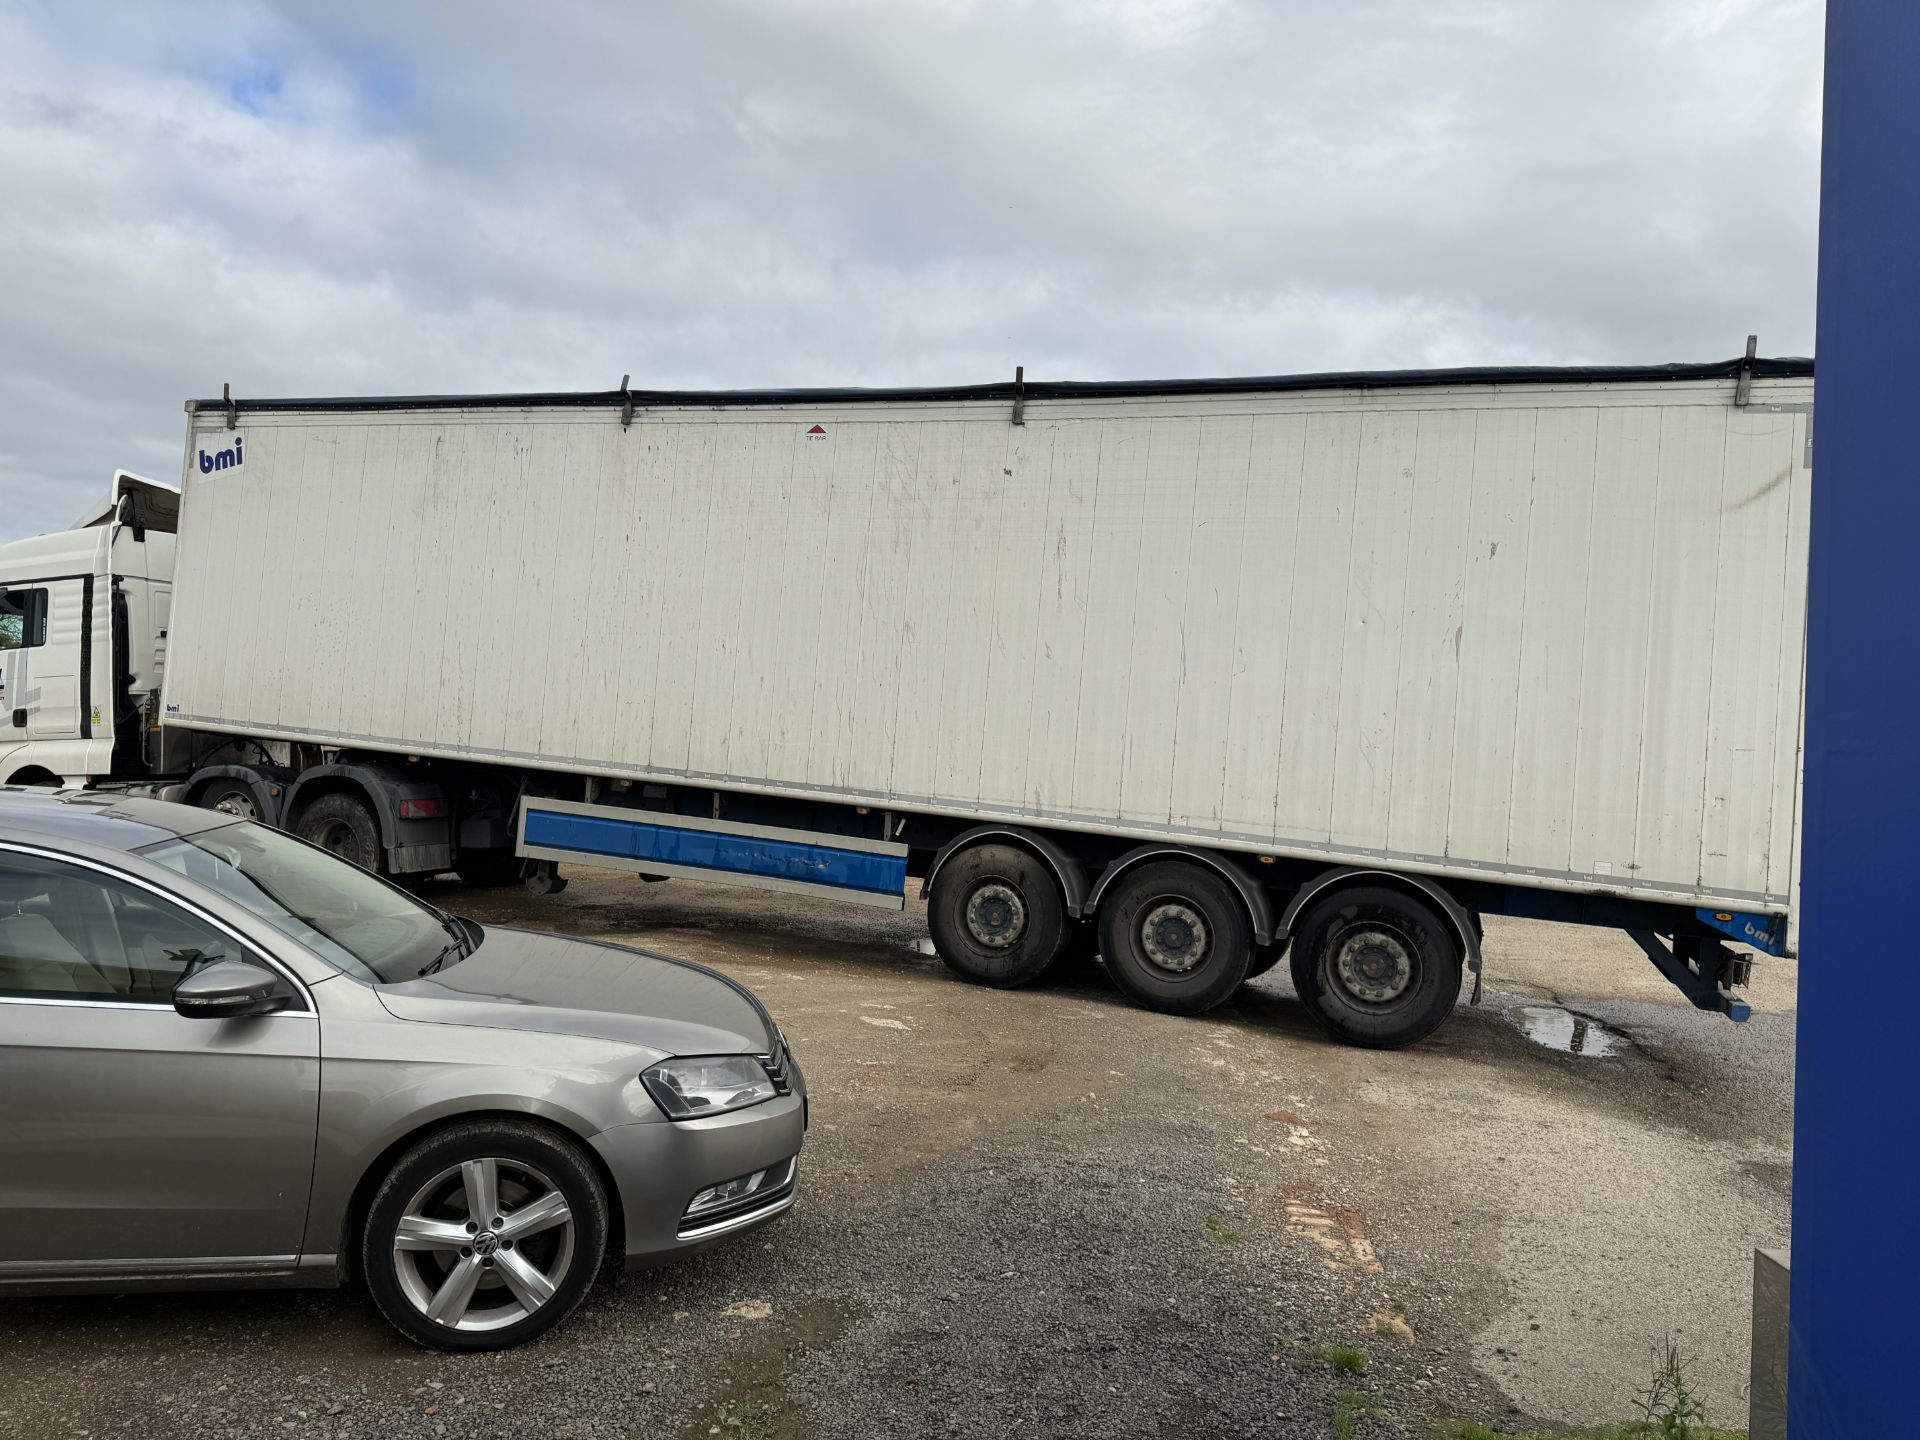 2017 - BMI Trailers Type AW 125, Tri Axle Air Suspension 125 Yard Cargo Floor Trailer - Image 25 of 46